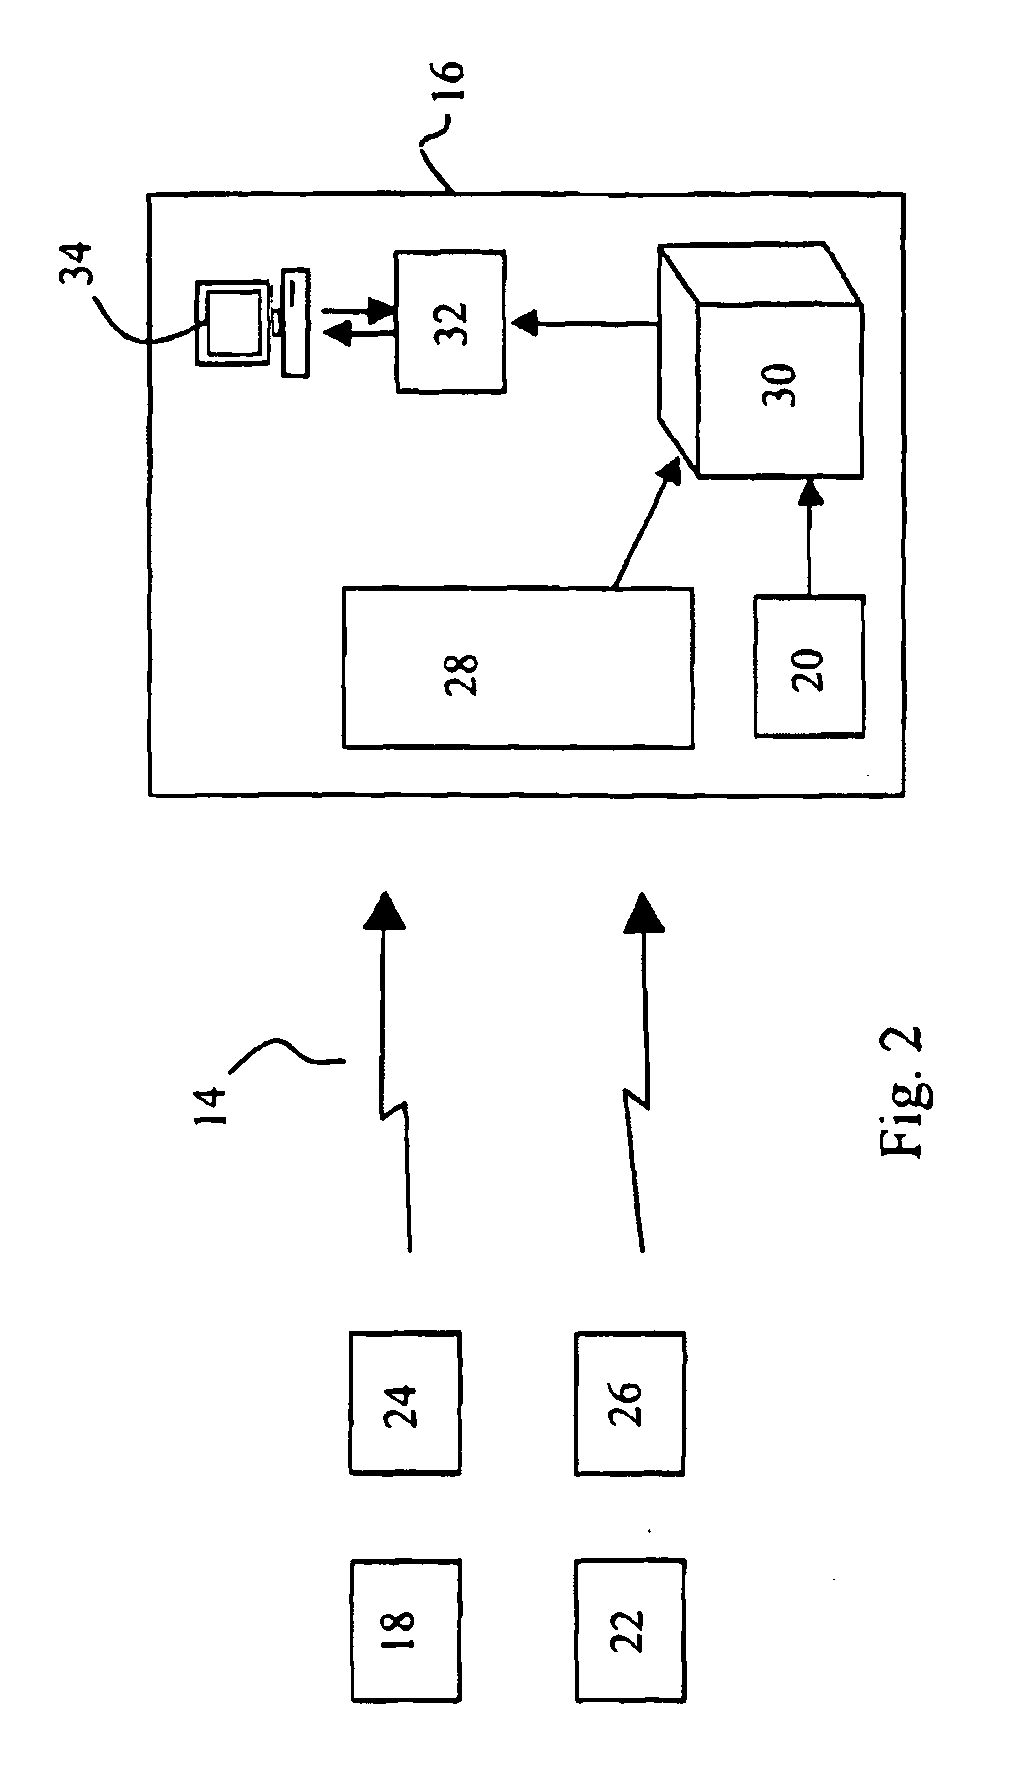 Diagnostic system and method for monitoring a rail system